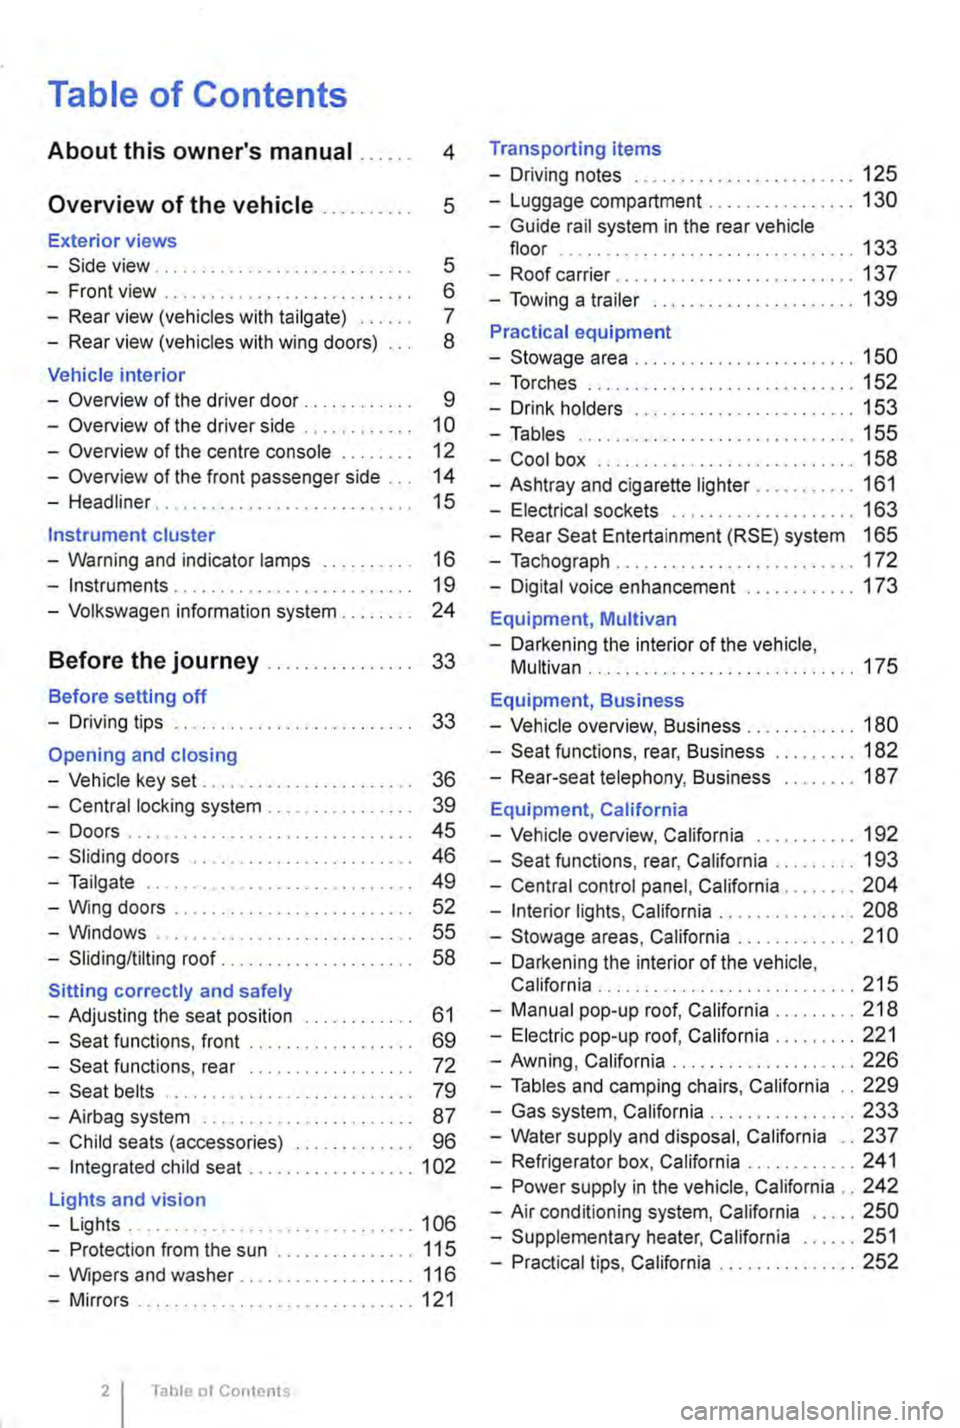 VOLKSWAGEN TRANSPORTER 2012  Owners Manual Table of Contents 
About this owners manual . . . . . . 4 
Overview of the vehicle . . . . . . . . . . 5 
Exterior views 
-Side view . . . . . . . . . . . . . . . . . . . . . . . . . . . . 5 
-Front 